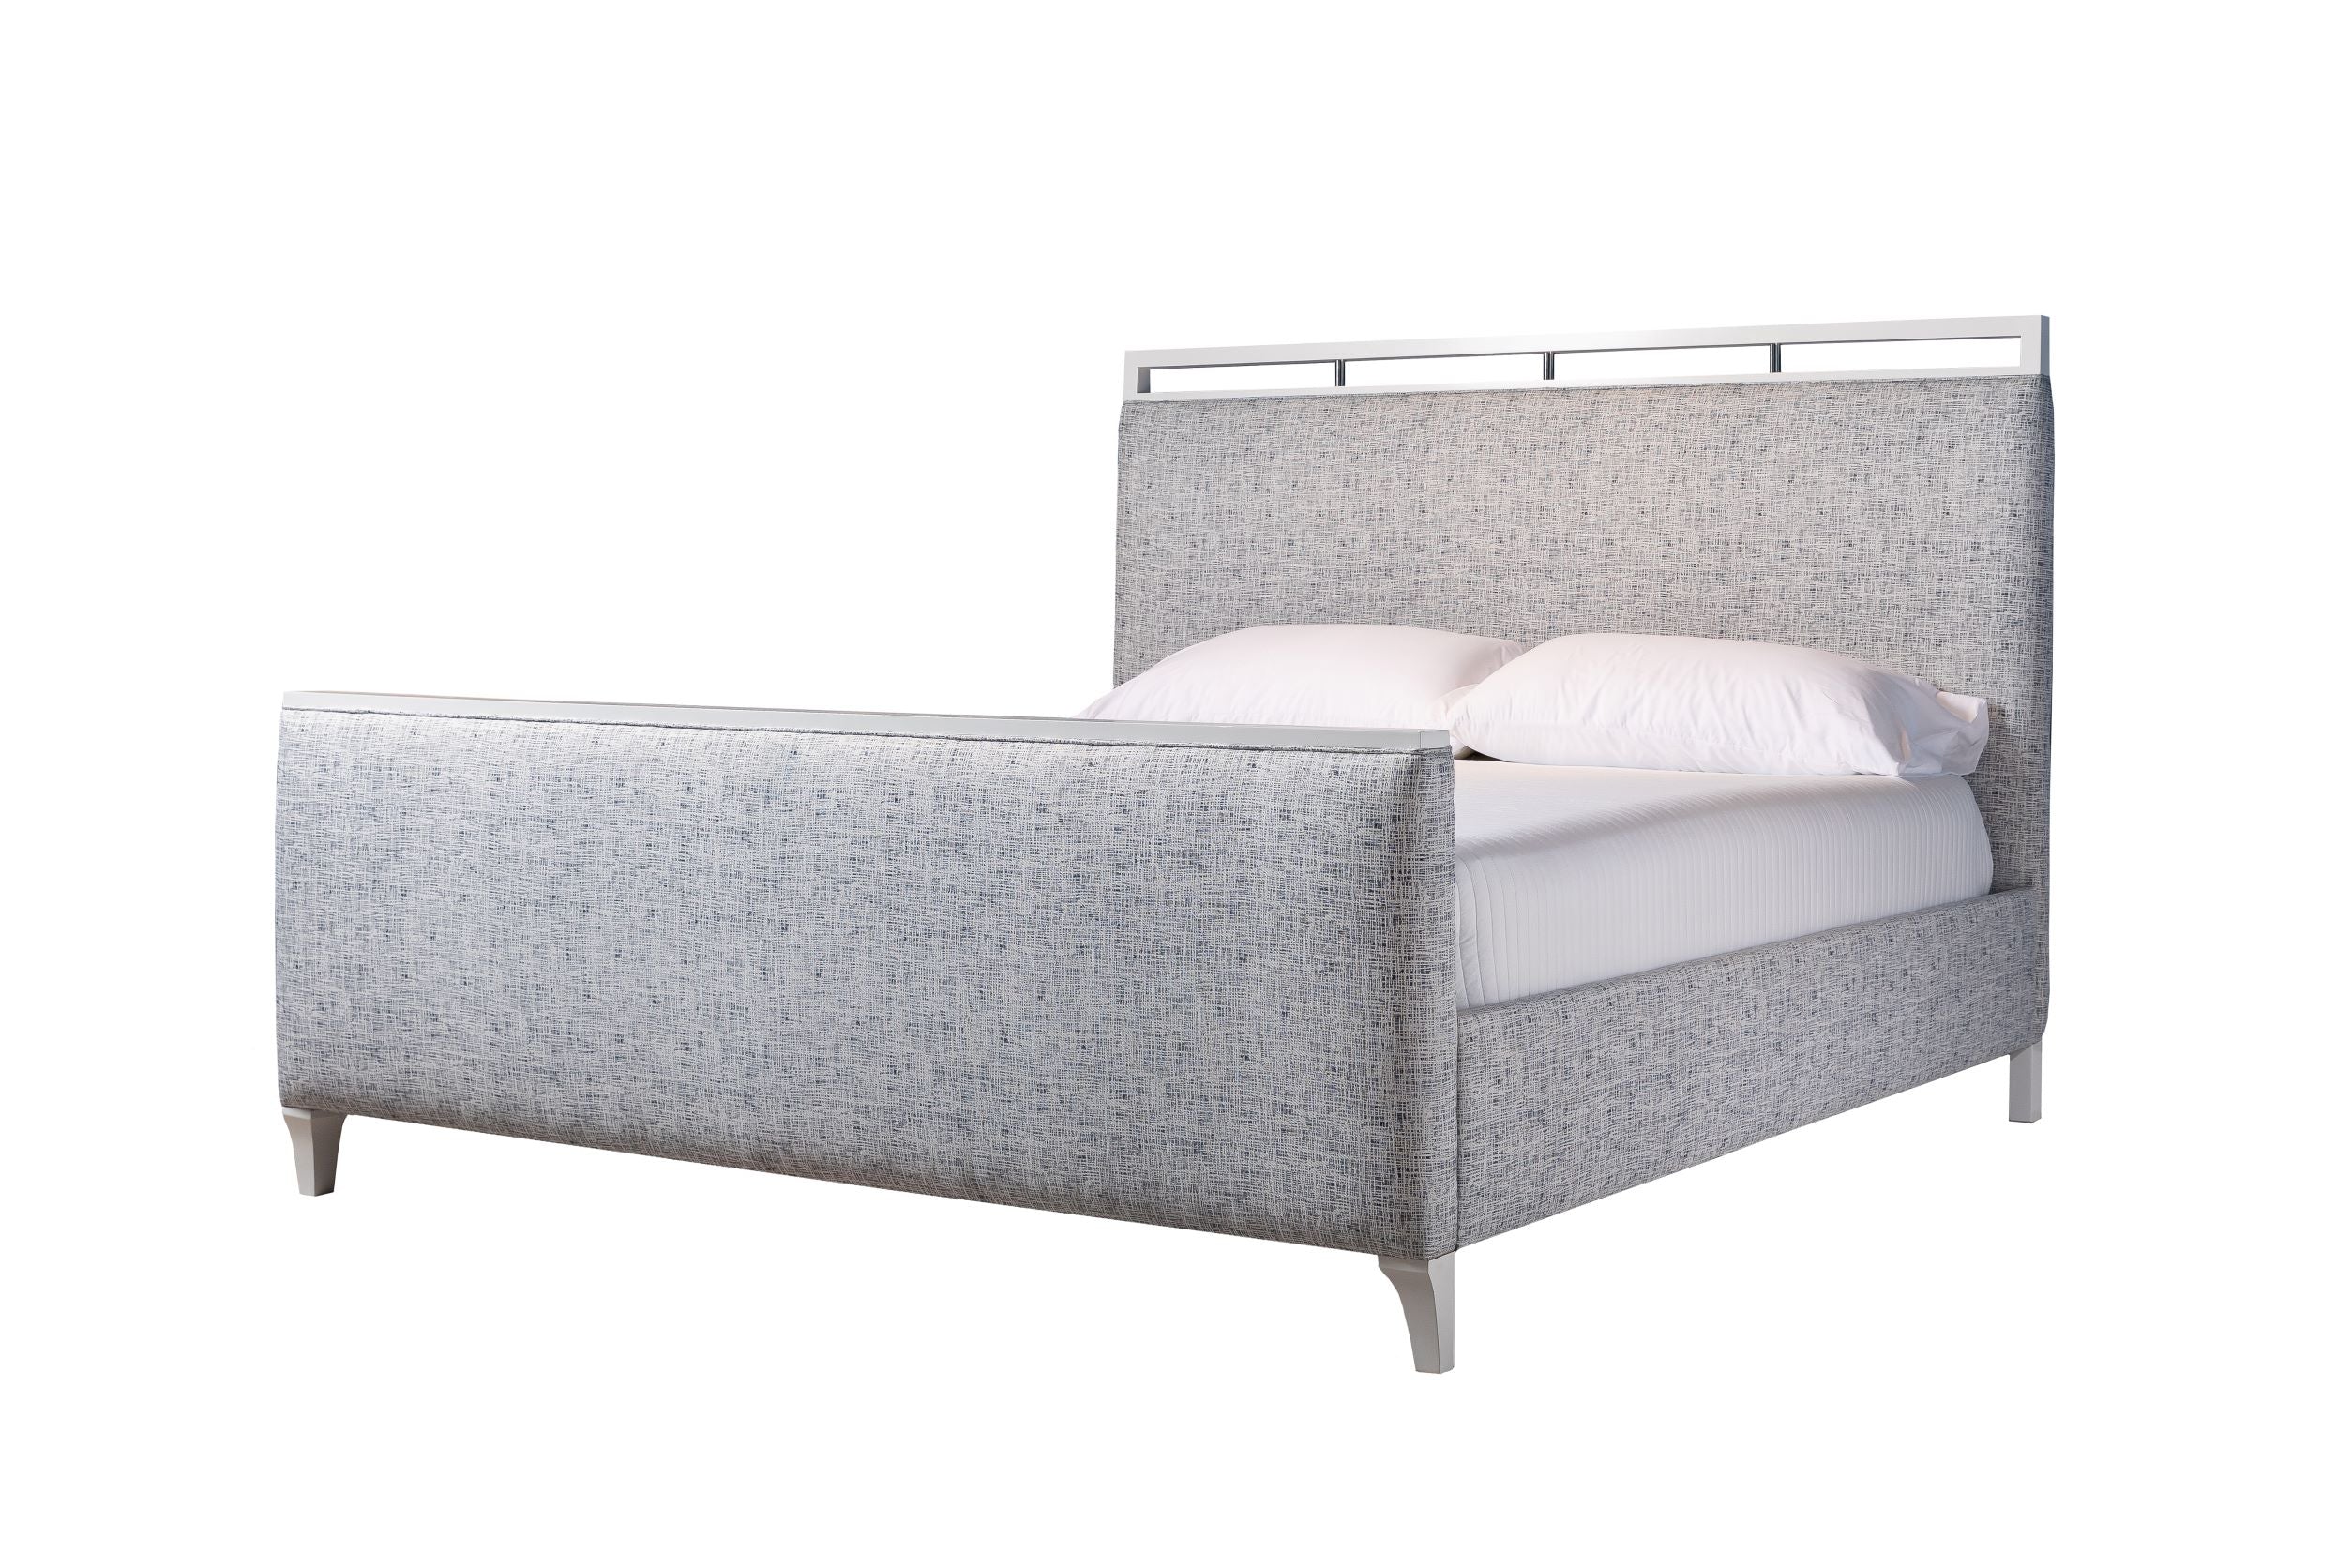 Gwen Complete Bed - Queen Size